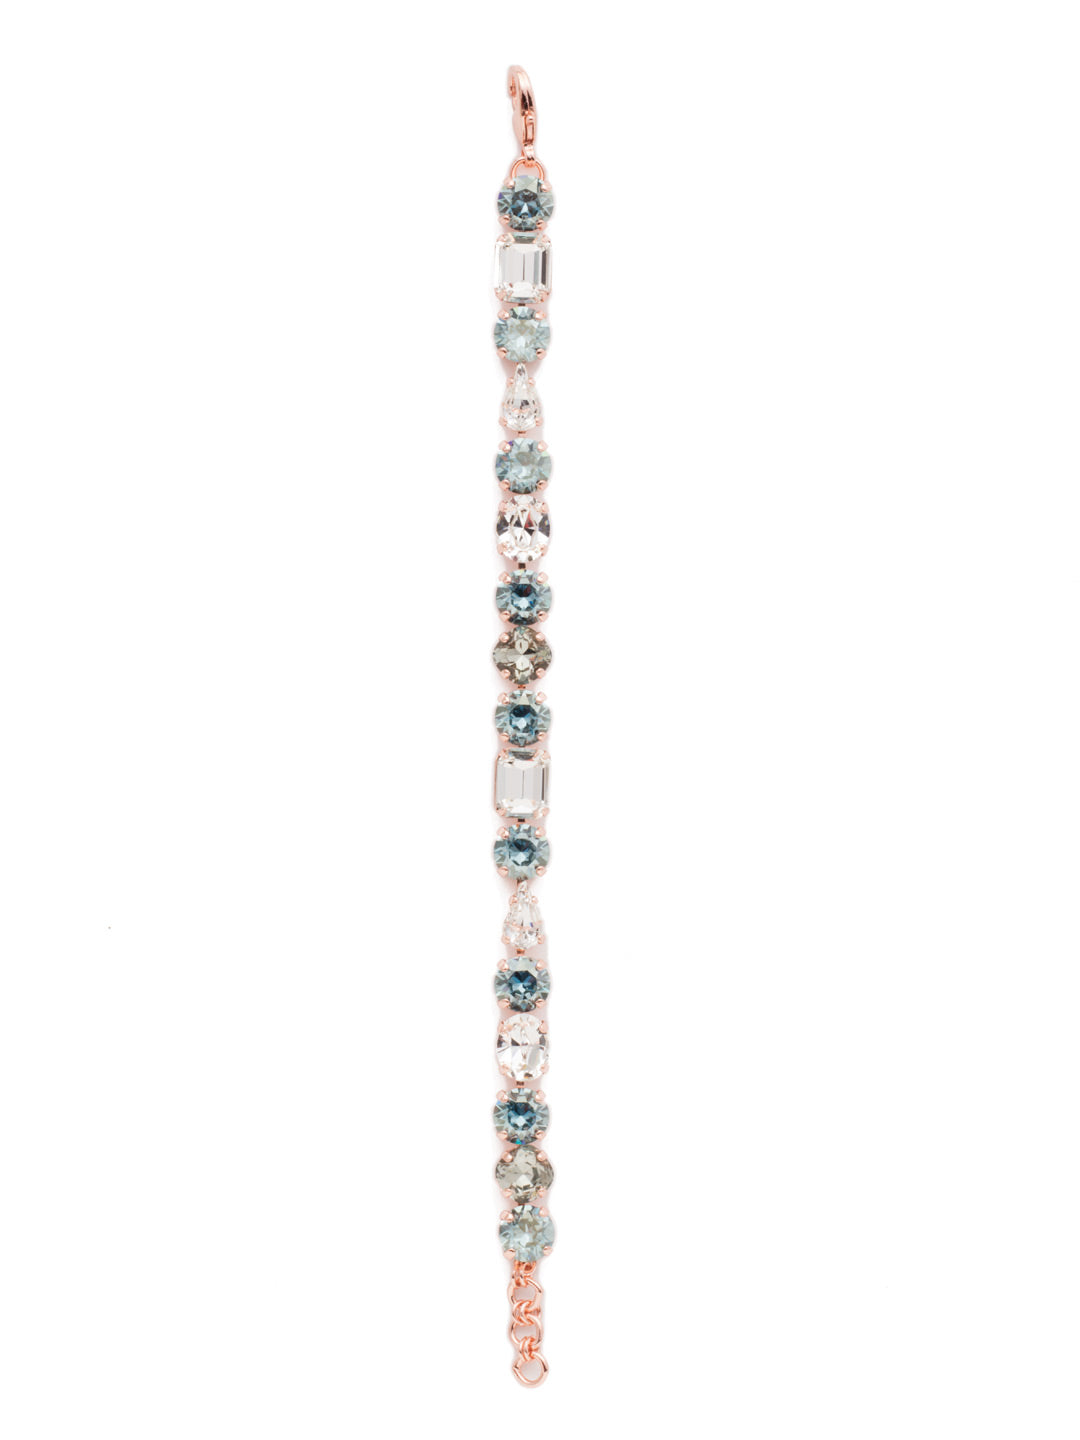 Clover Tennis Bracelet - BDQ13RGCAZ - A unique multi-cut line bracelet featuring brilliant emerald, pear, round and cushion-cut crystals. From Sorrelli's Crystal Azure collection in our Rose Gold-tone finish.